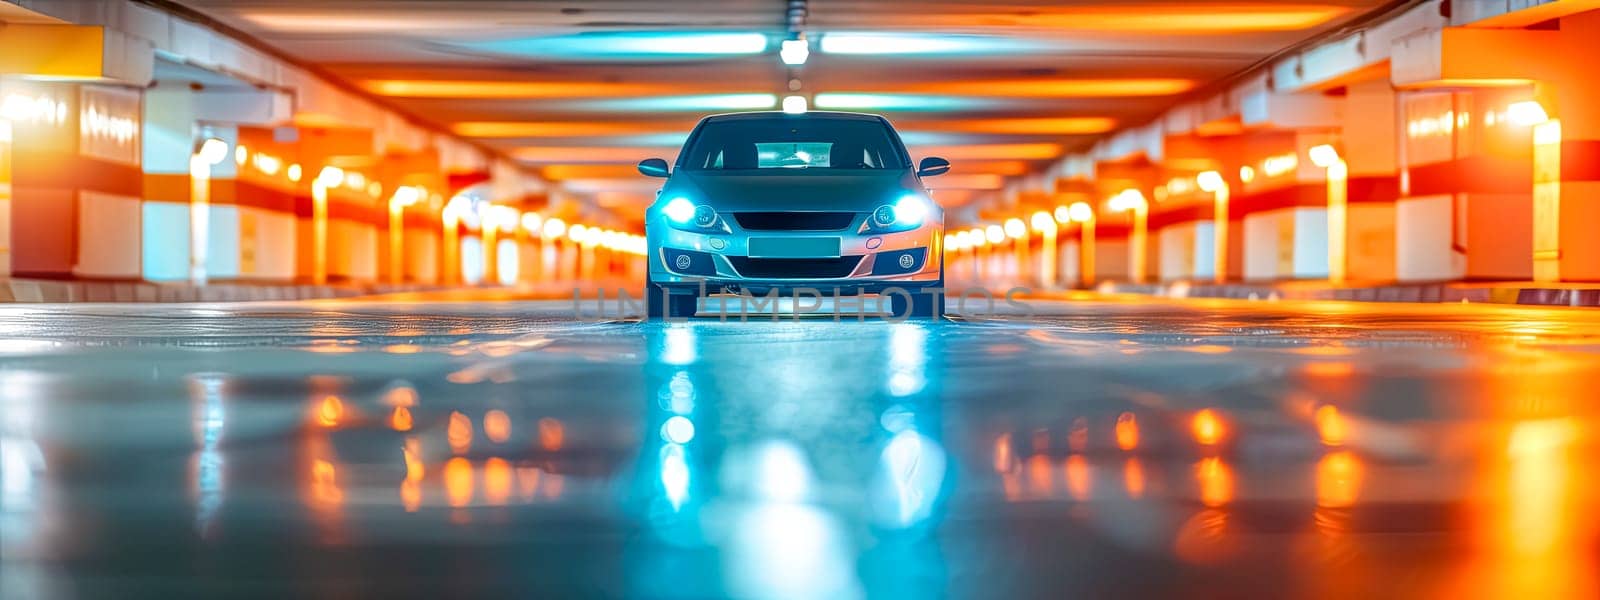 Blue Compact Car in Underground Parking with Vibrant Lighting by Edophoto